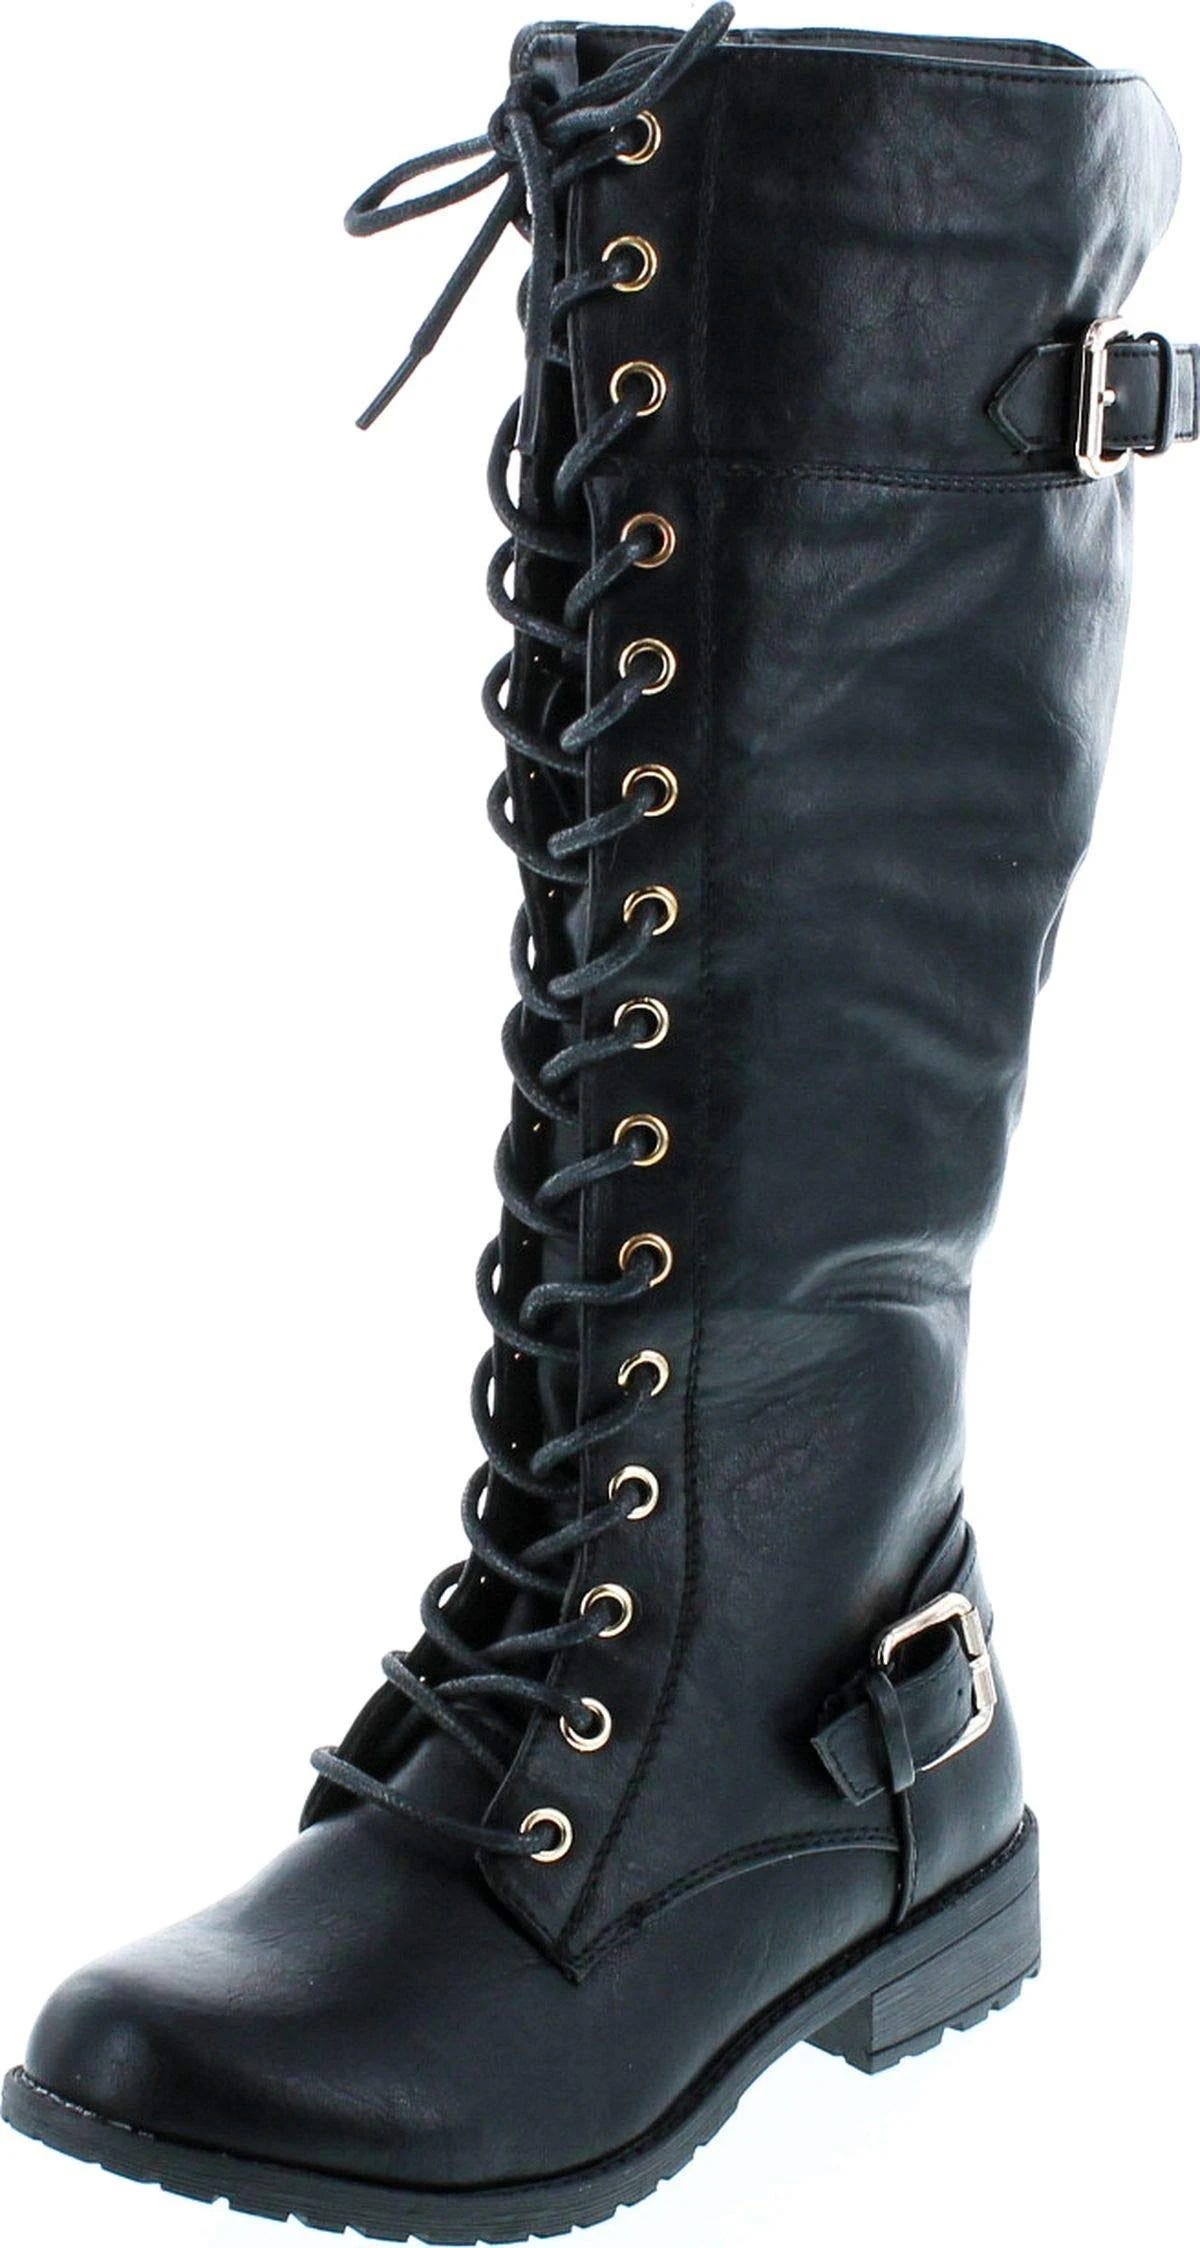 Stylish Buckle Riding Boots with Slip-Resistant Support | Image